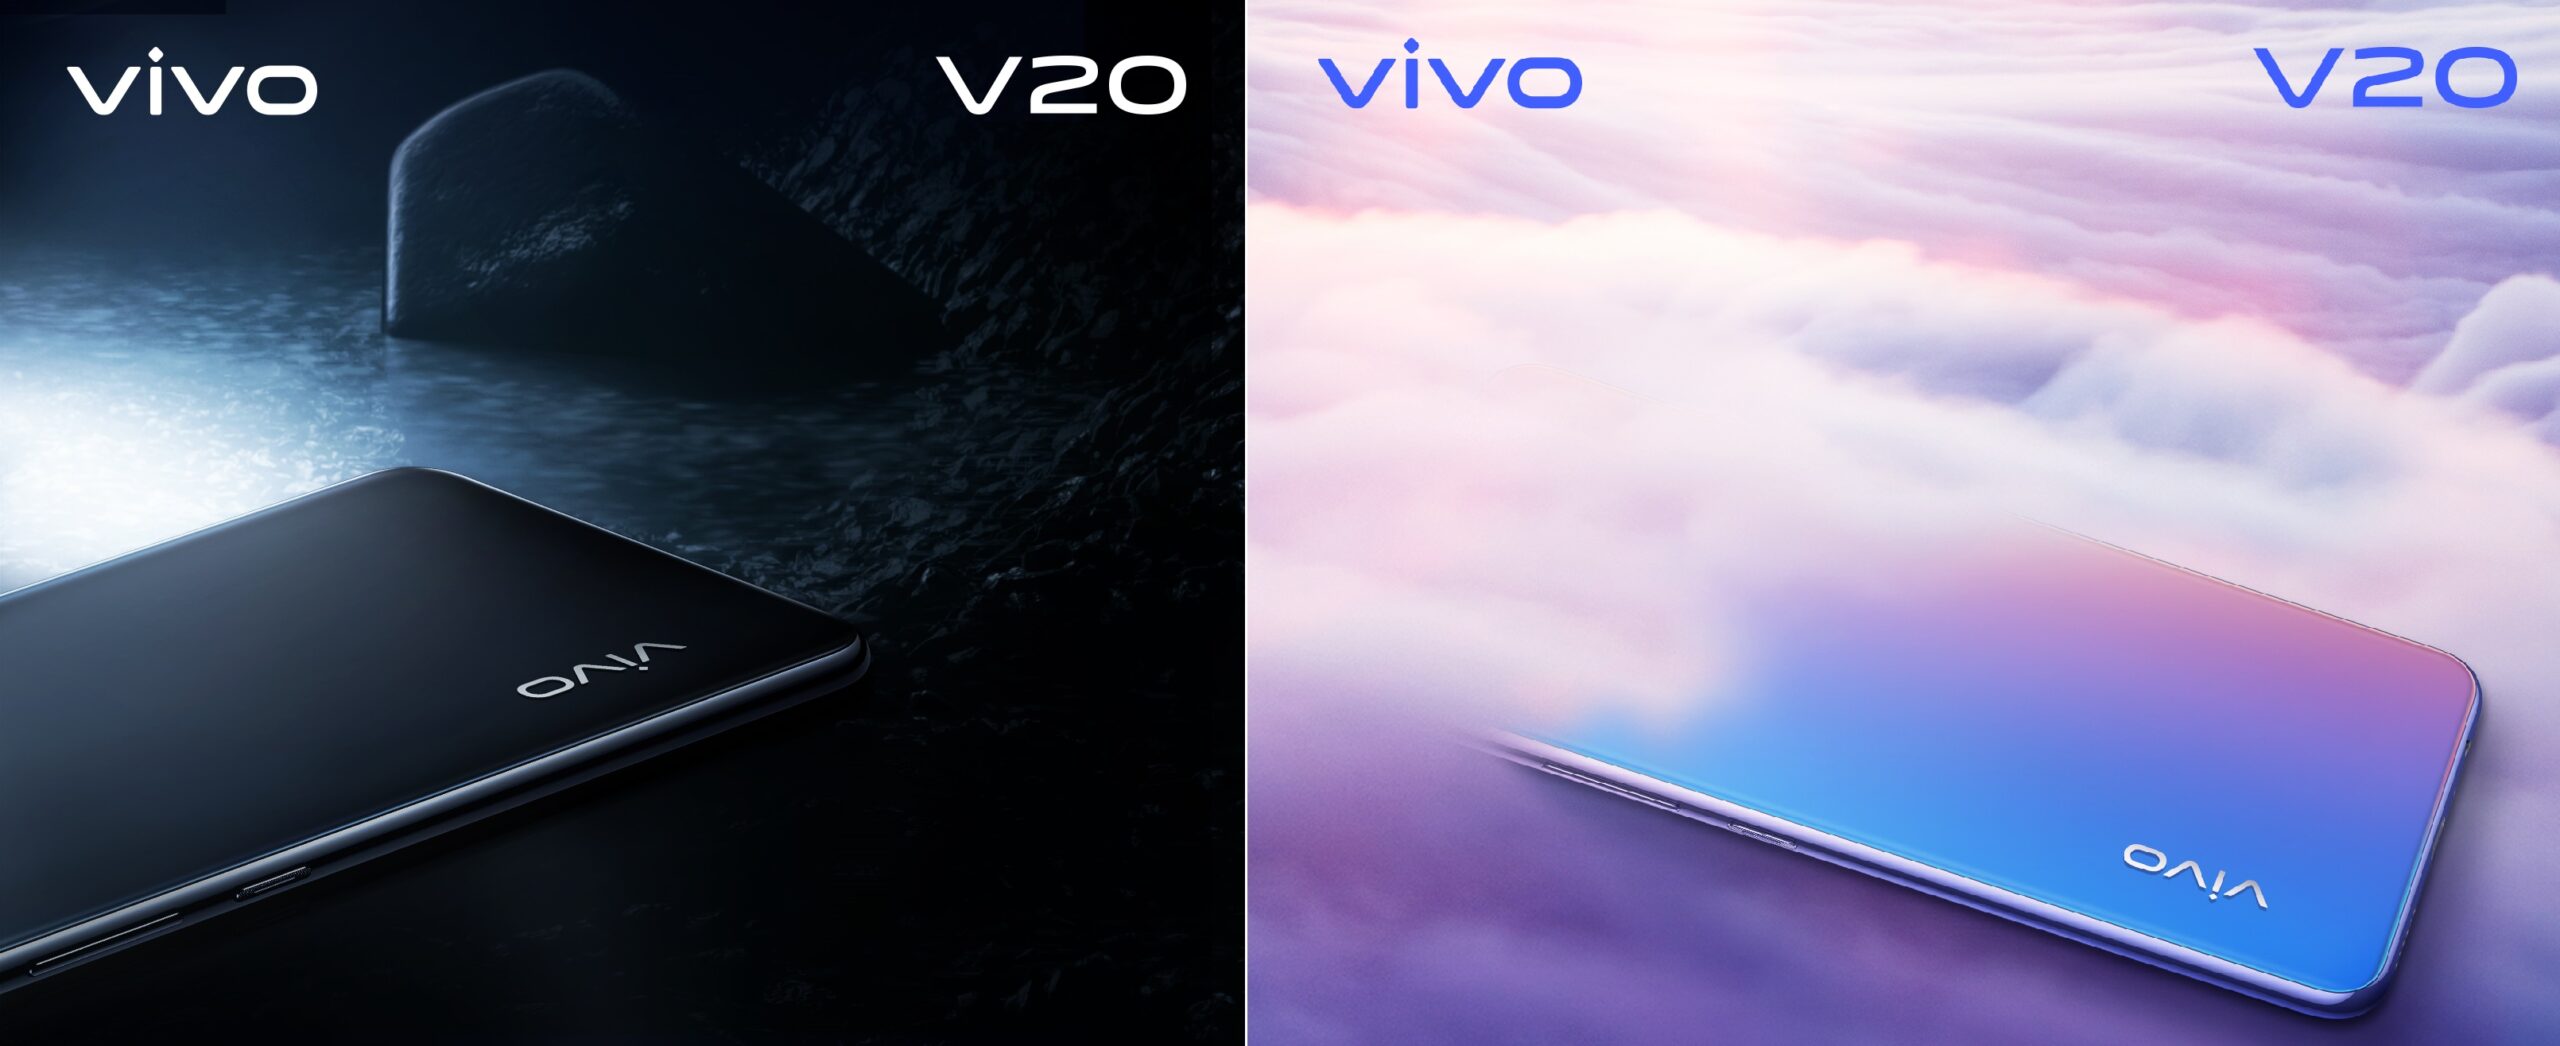 VIVO V20 TO HIT THE MARKET WITH INDUSTRY-LEADING EYE AUTOFOCUS FEATURE AND ULTRA-SLEEK AG GLASS DESIGN